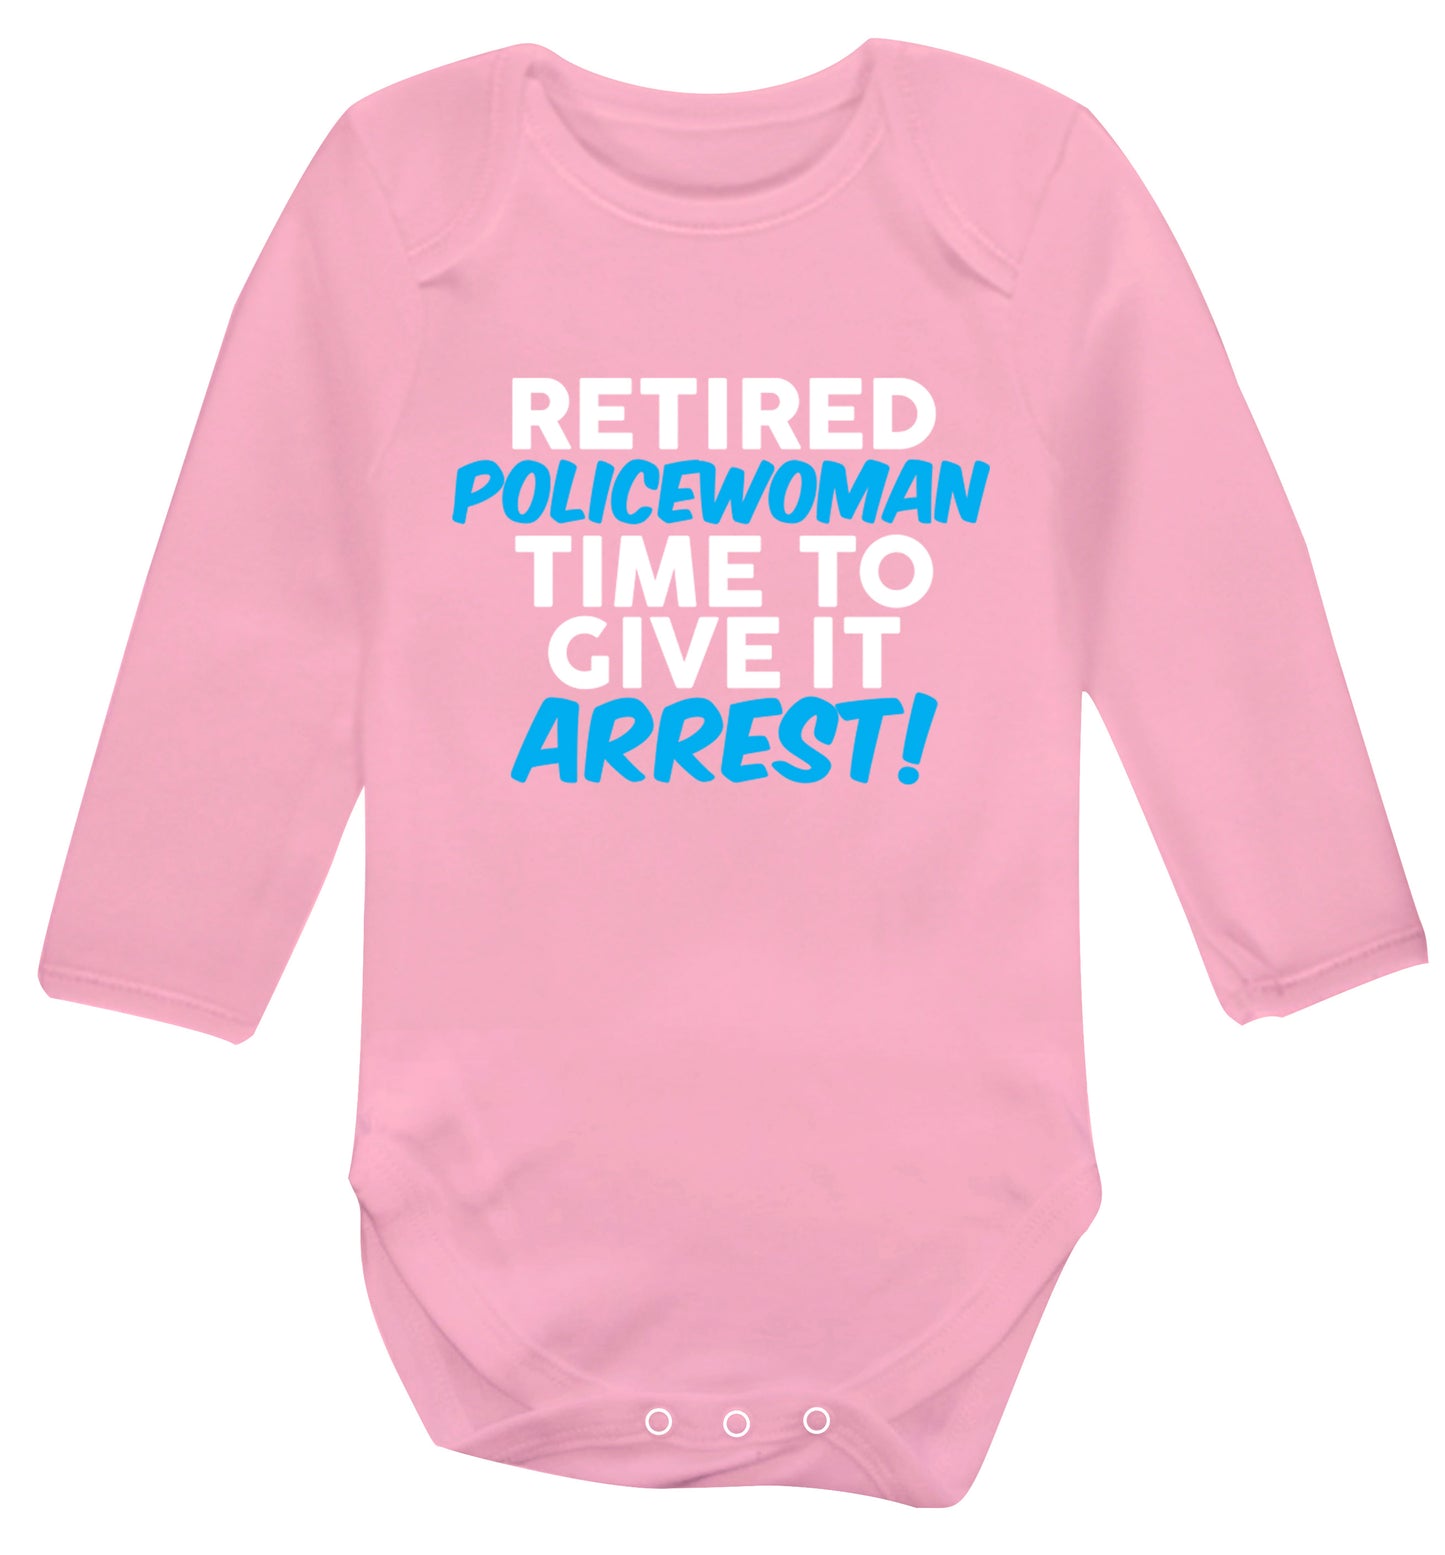 Retired policewoman time to give it arrest Baby Vest long sleeved pale pink 6-12 months